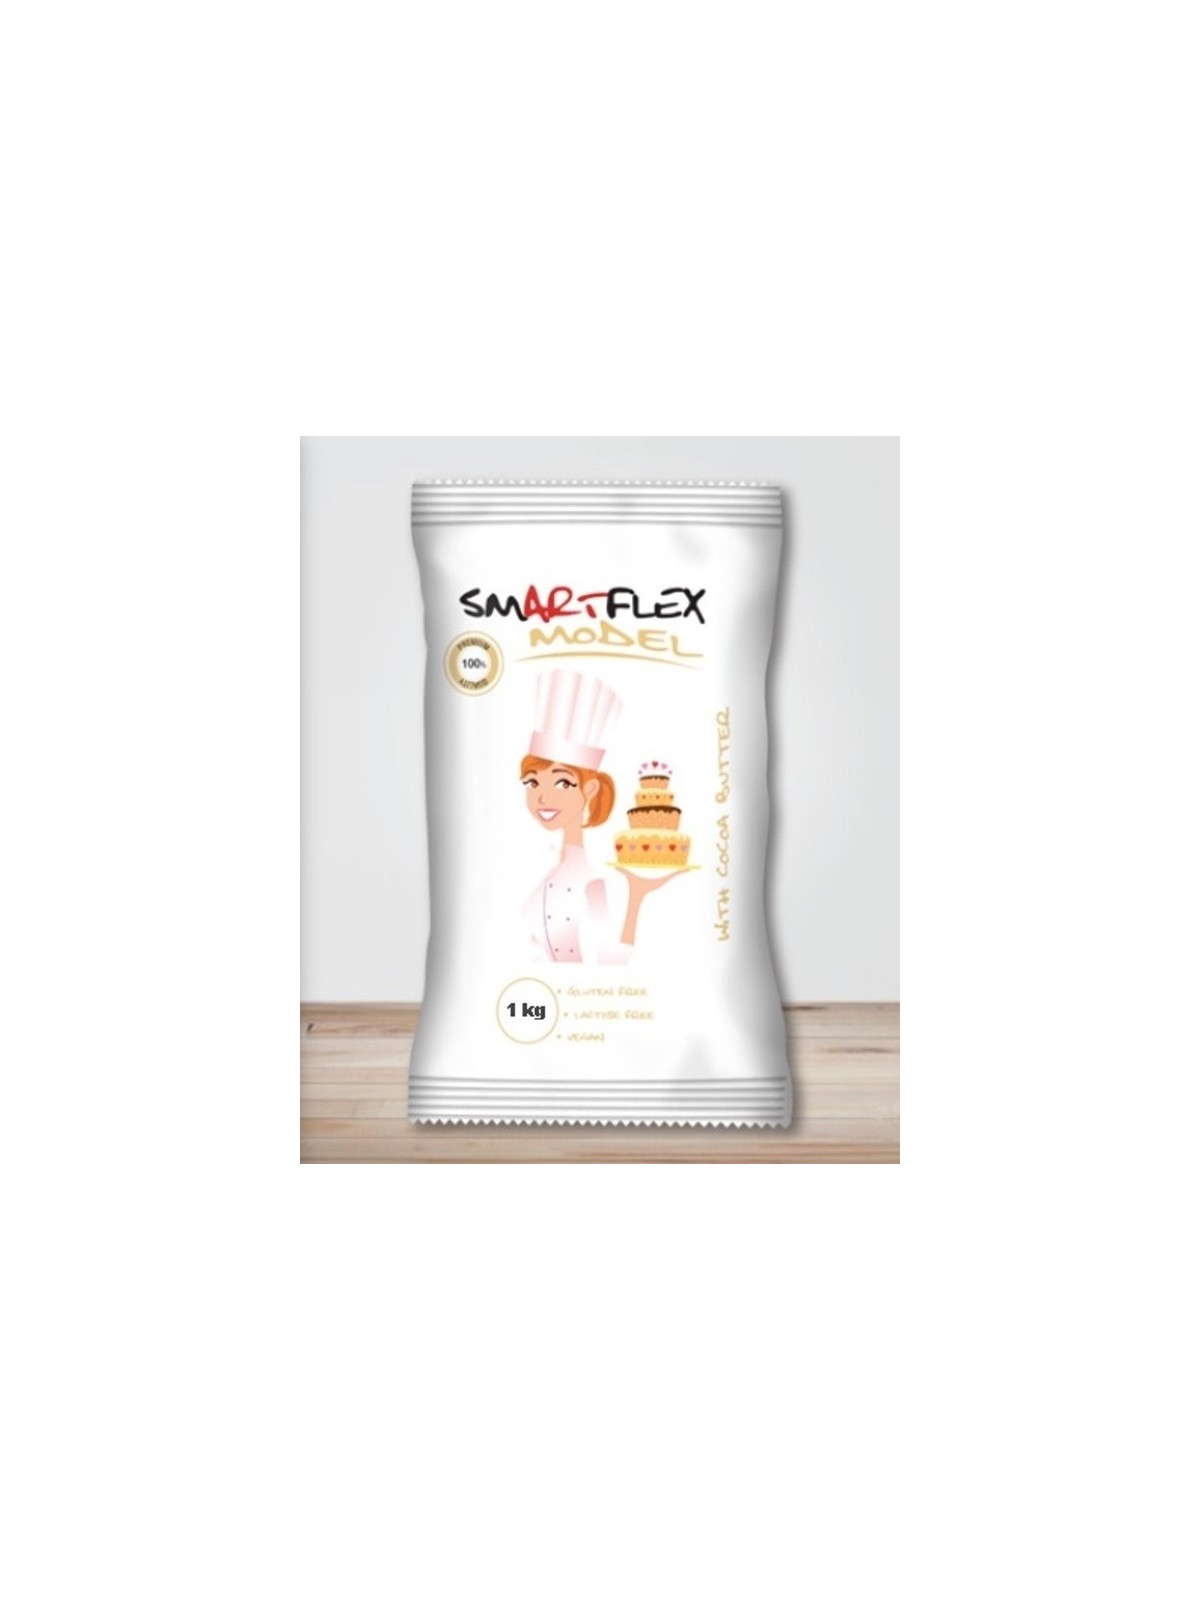 Smartflex Model with cocoa butter - 1kg